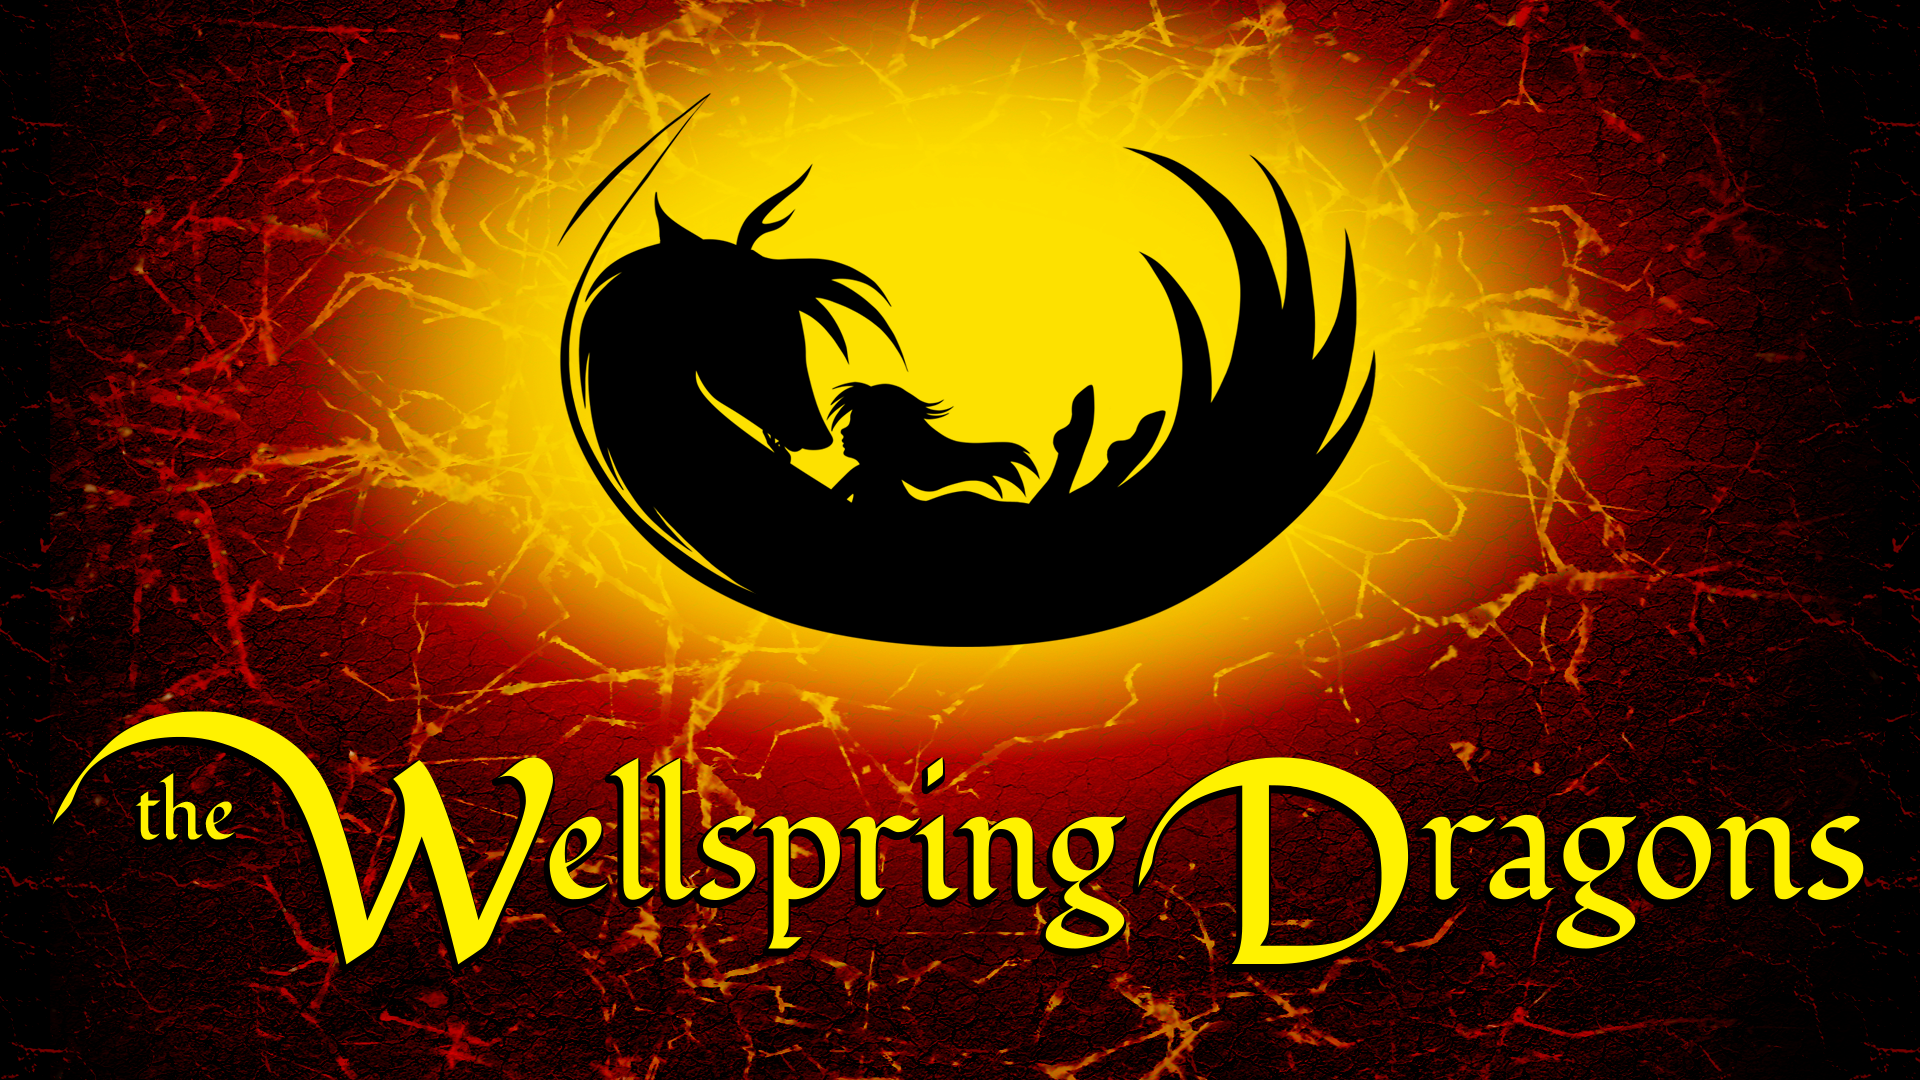 The Wellspring Dragons world cover